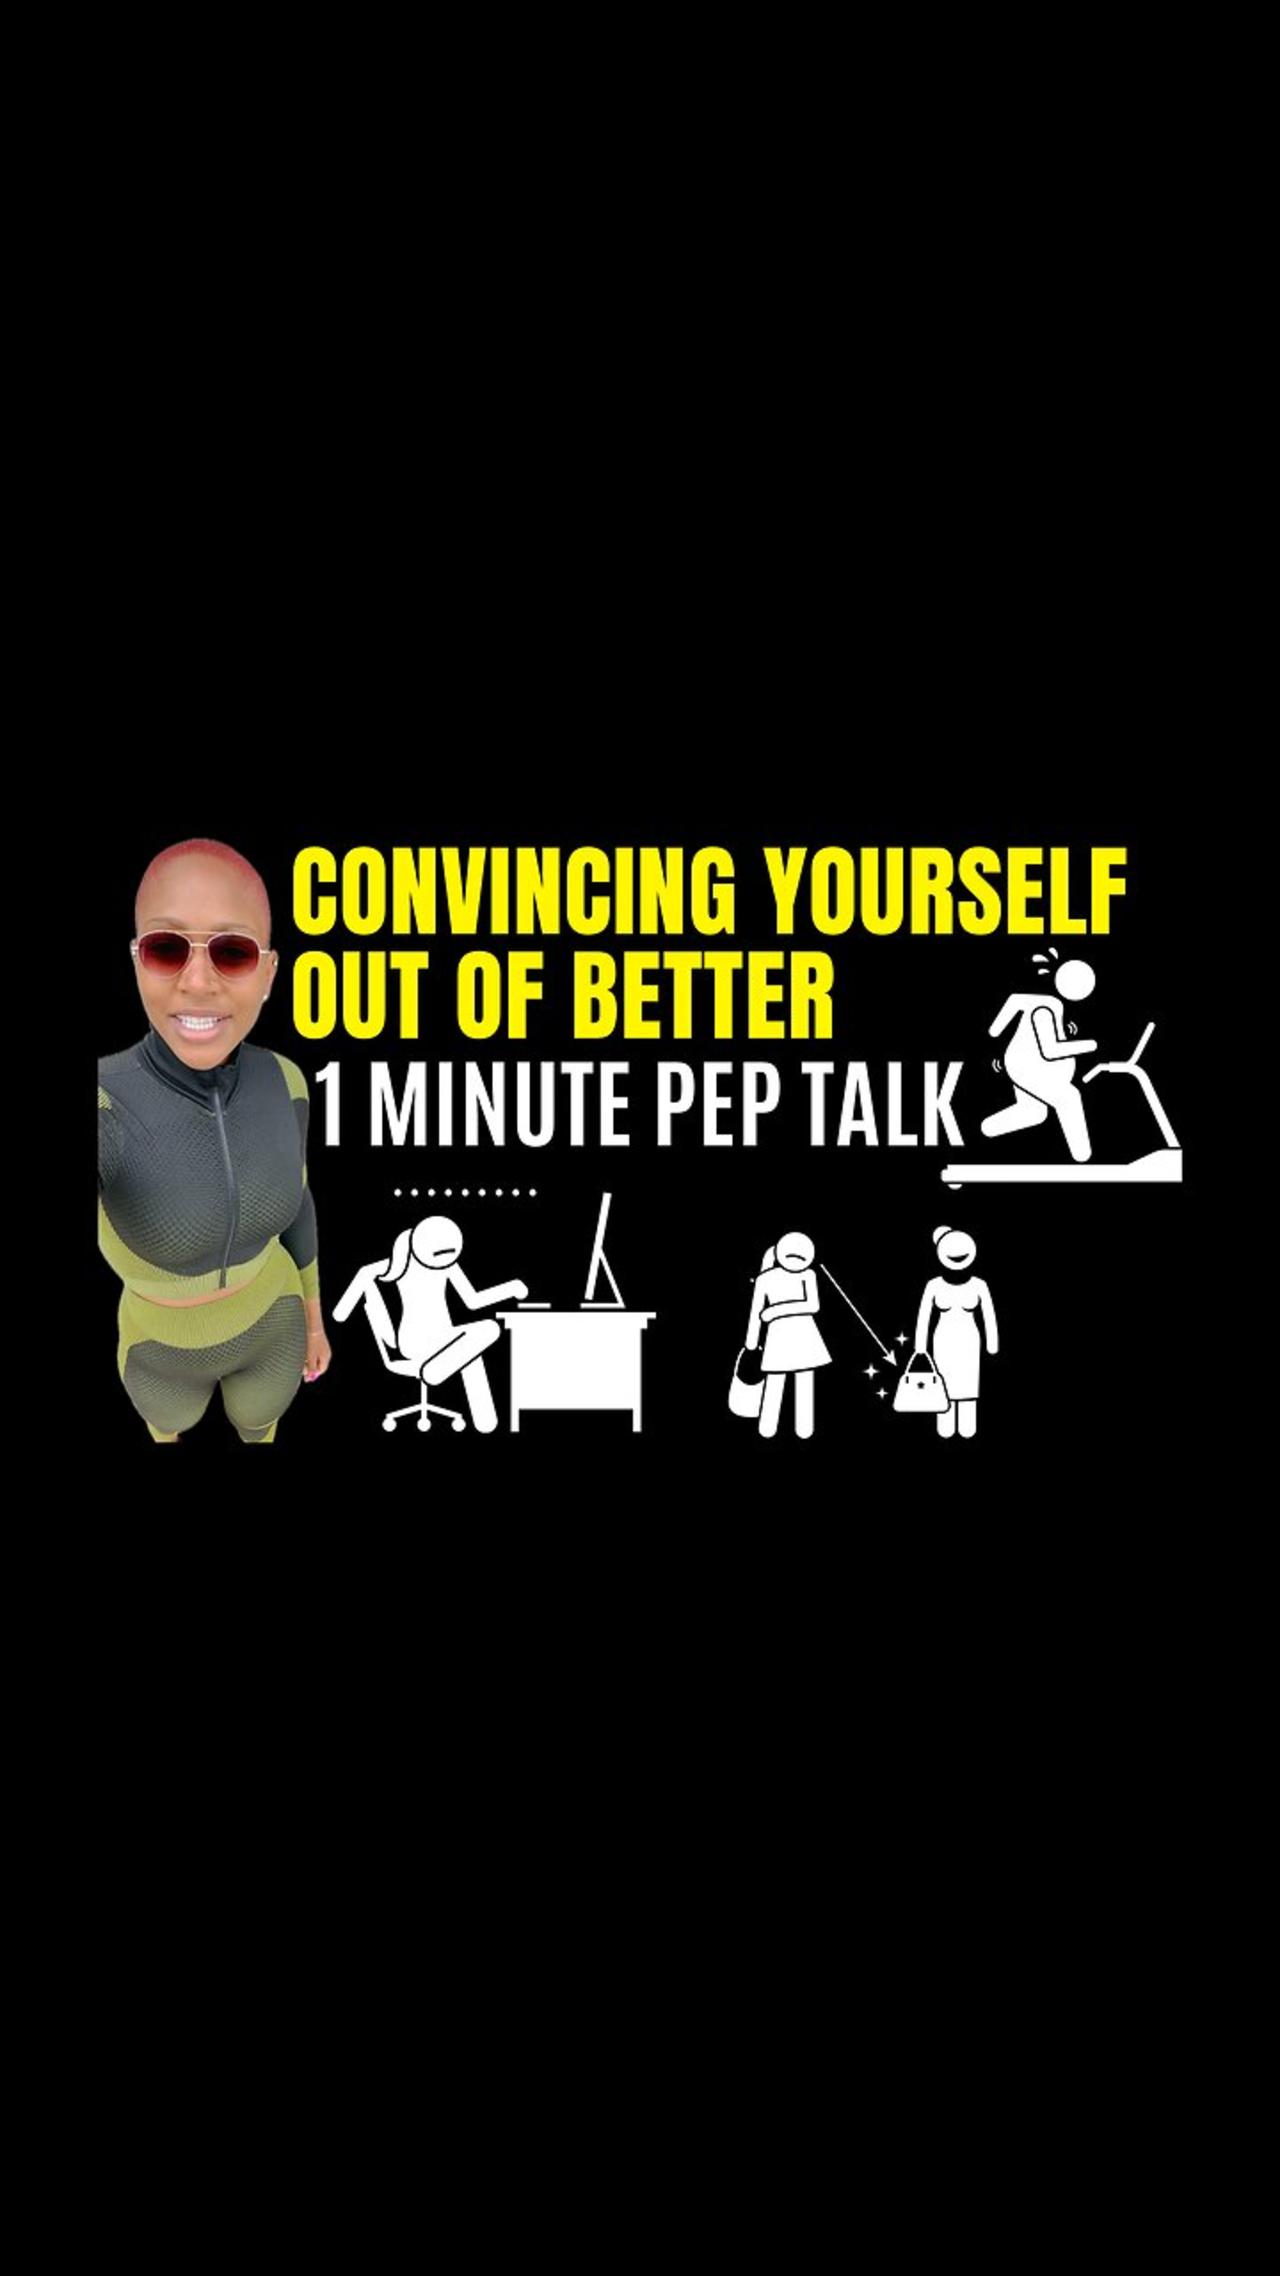 Stop Convincing Yourself You Don’t Want Better (1 minute motivational speech)